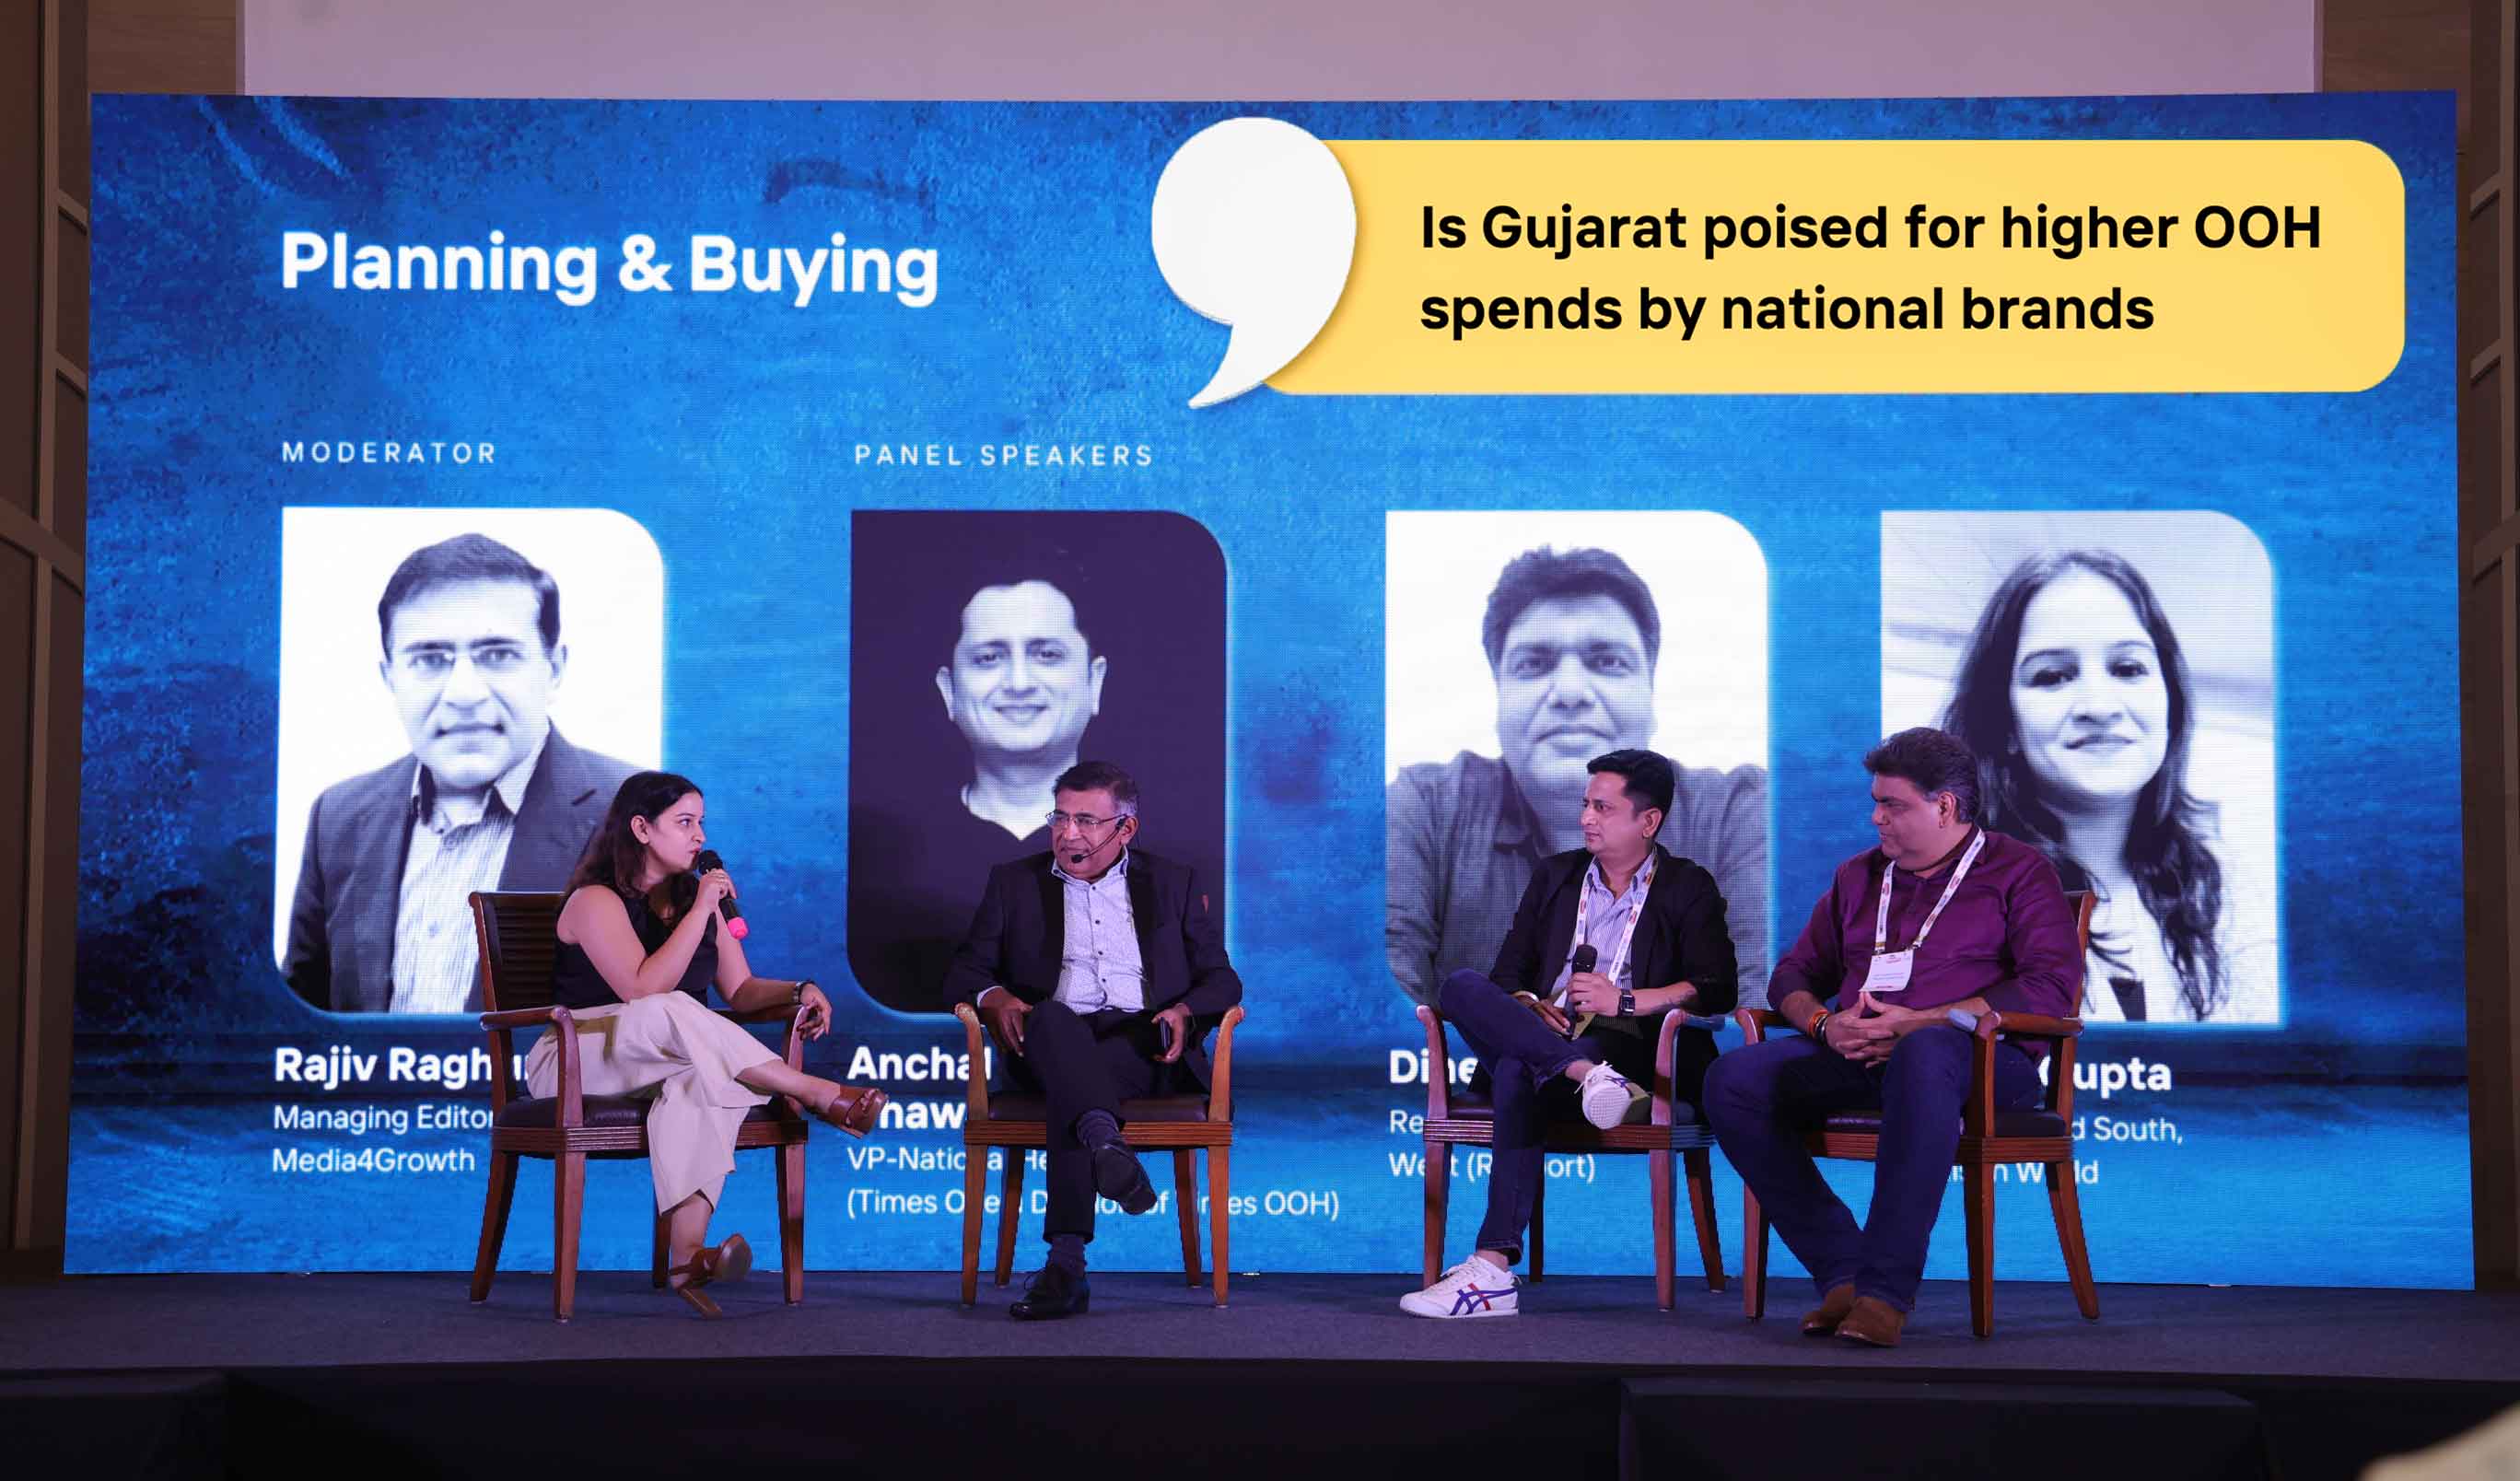 Anchal Kumar Dhawan, VP-National Head of Times One, a division of Times OOH, Deepa Gupta, VP of South and West at Madison World, Dinesh Panjabi, Regional Director - West at Rapport Advertising engage in deep discussion on Gujarat OOH markets